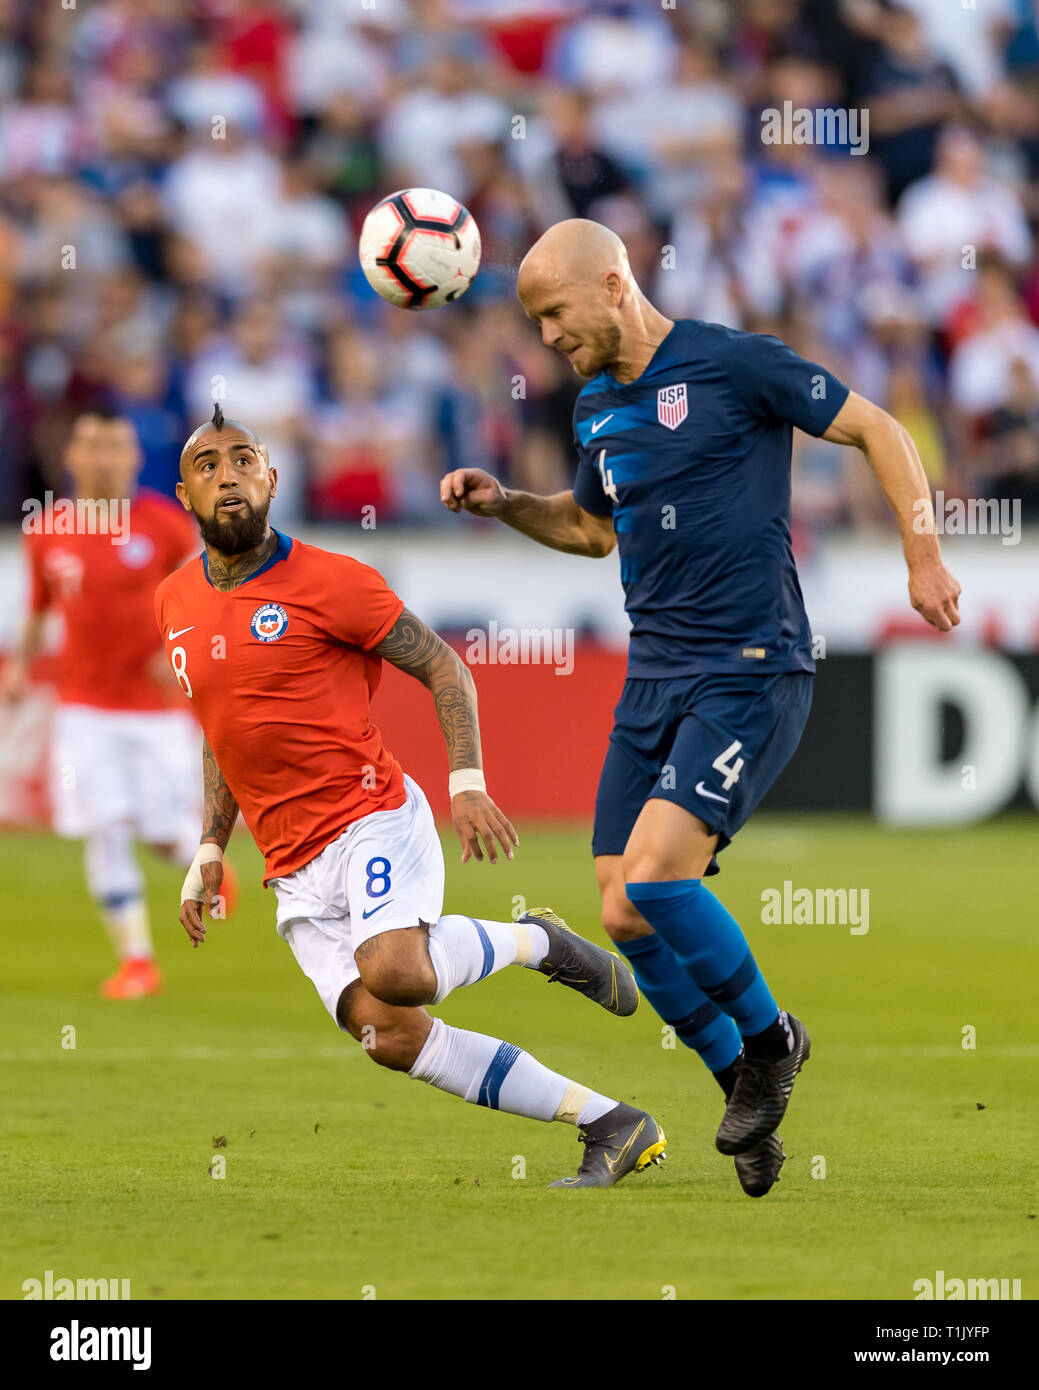 Houston, Texas, USA. 26th Mar 2019. USA midfielder Michael Bradley (4) heads the ball while Chile midfielder Arturo Vidal (8) anticipates the send during the second half of the international friendly match between USA and Chile at BBVA Compass Stadium in Houston, Texas The final ends in a tie 1-1 © Maria Lysaker/CSM. Credit: Cal Sport Media/Alamy Live News Stock Photo